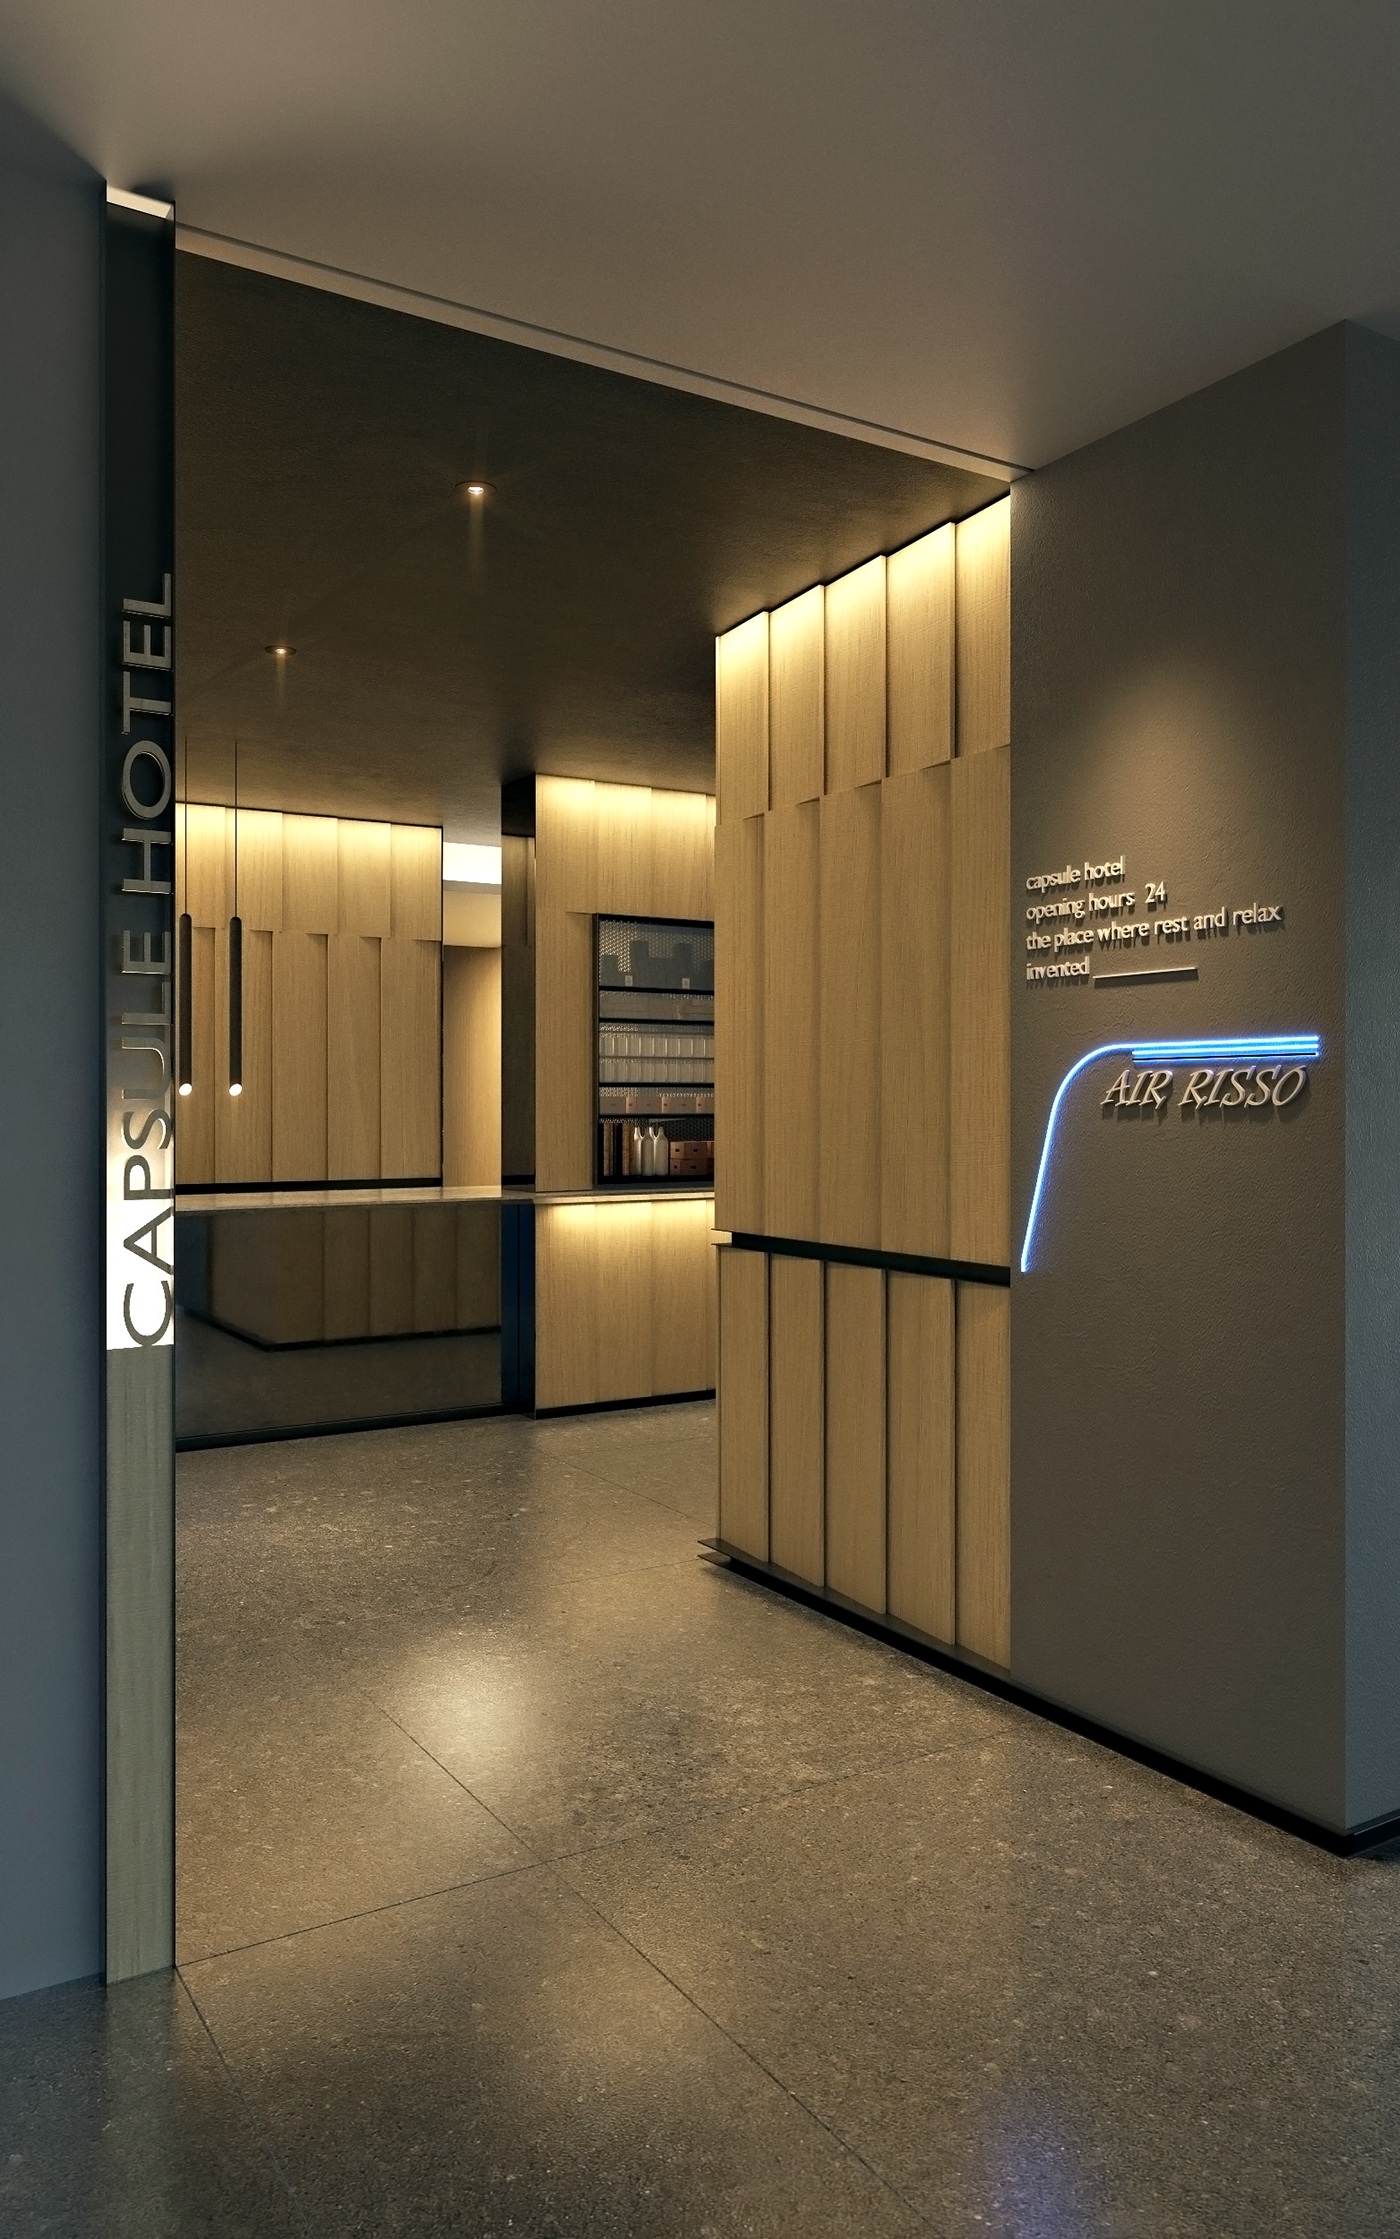 capsule hotel concept Interior architecture interiordesign Lobby reception front side Entry Doubledeck modern cozy linear alignment AANDPARTNERS Jimbaran bali singapore